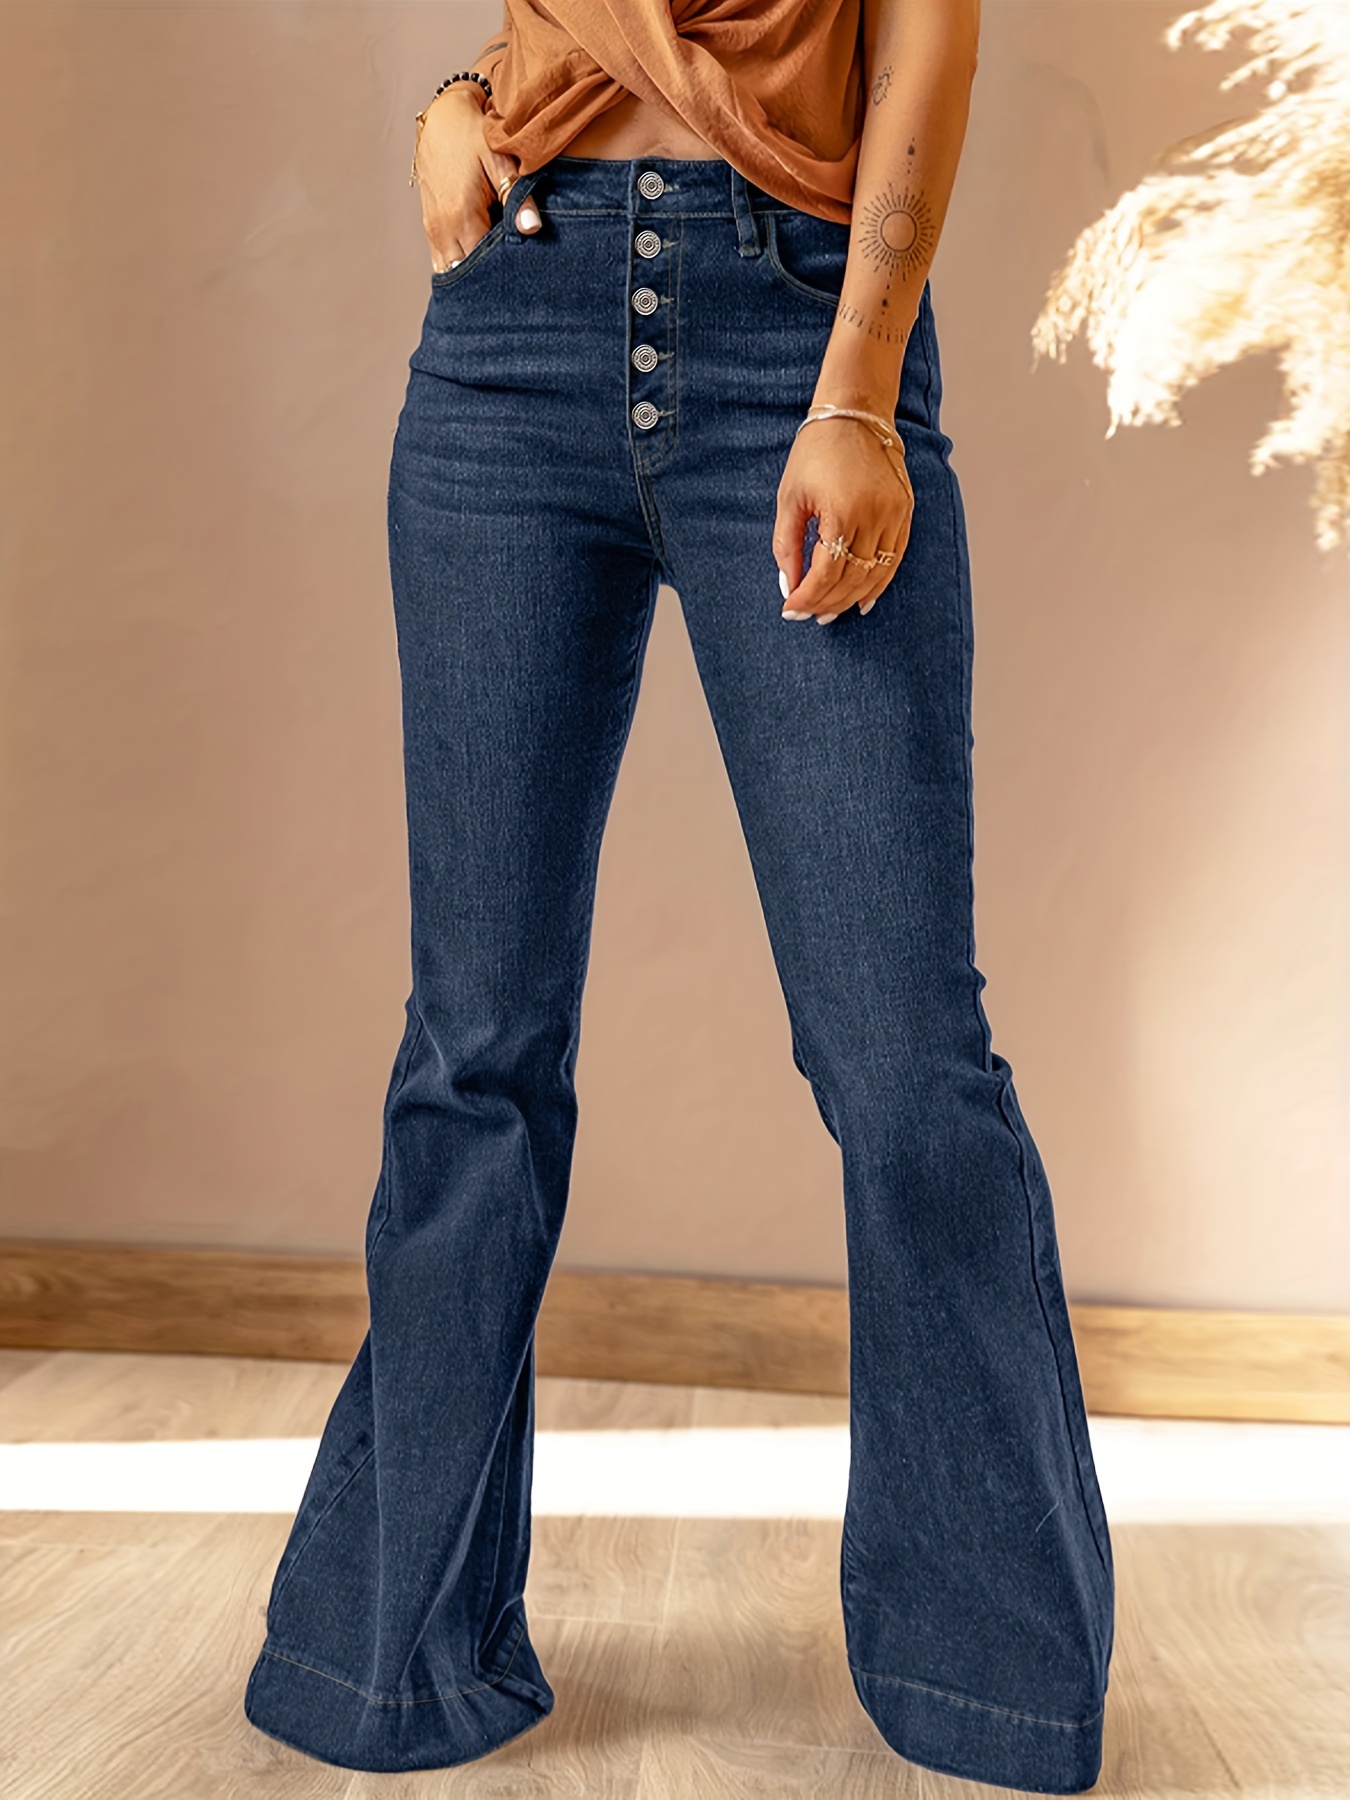 Plus Size Women's Jeans: Skinny, Flare & More